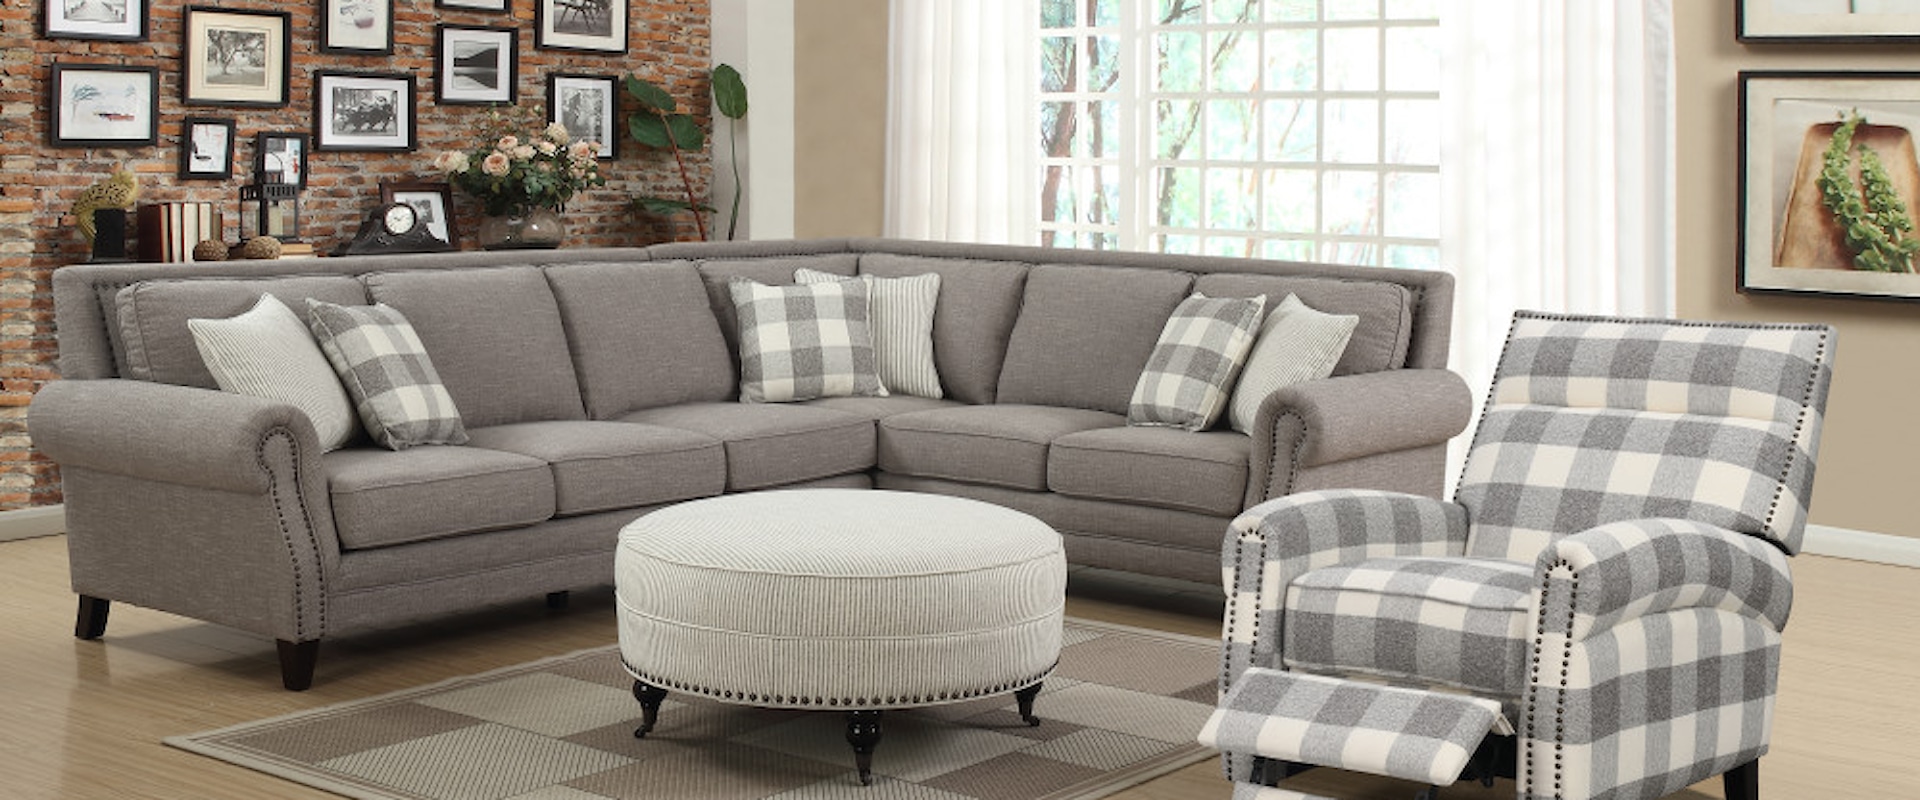 Living Room Set with Sectional